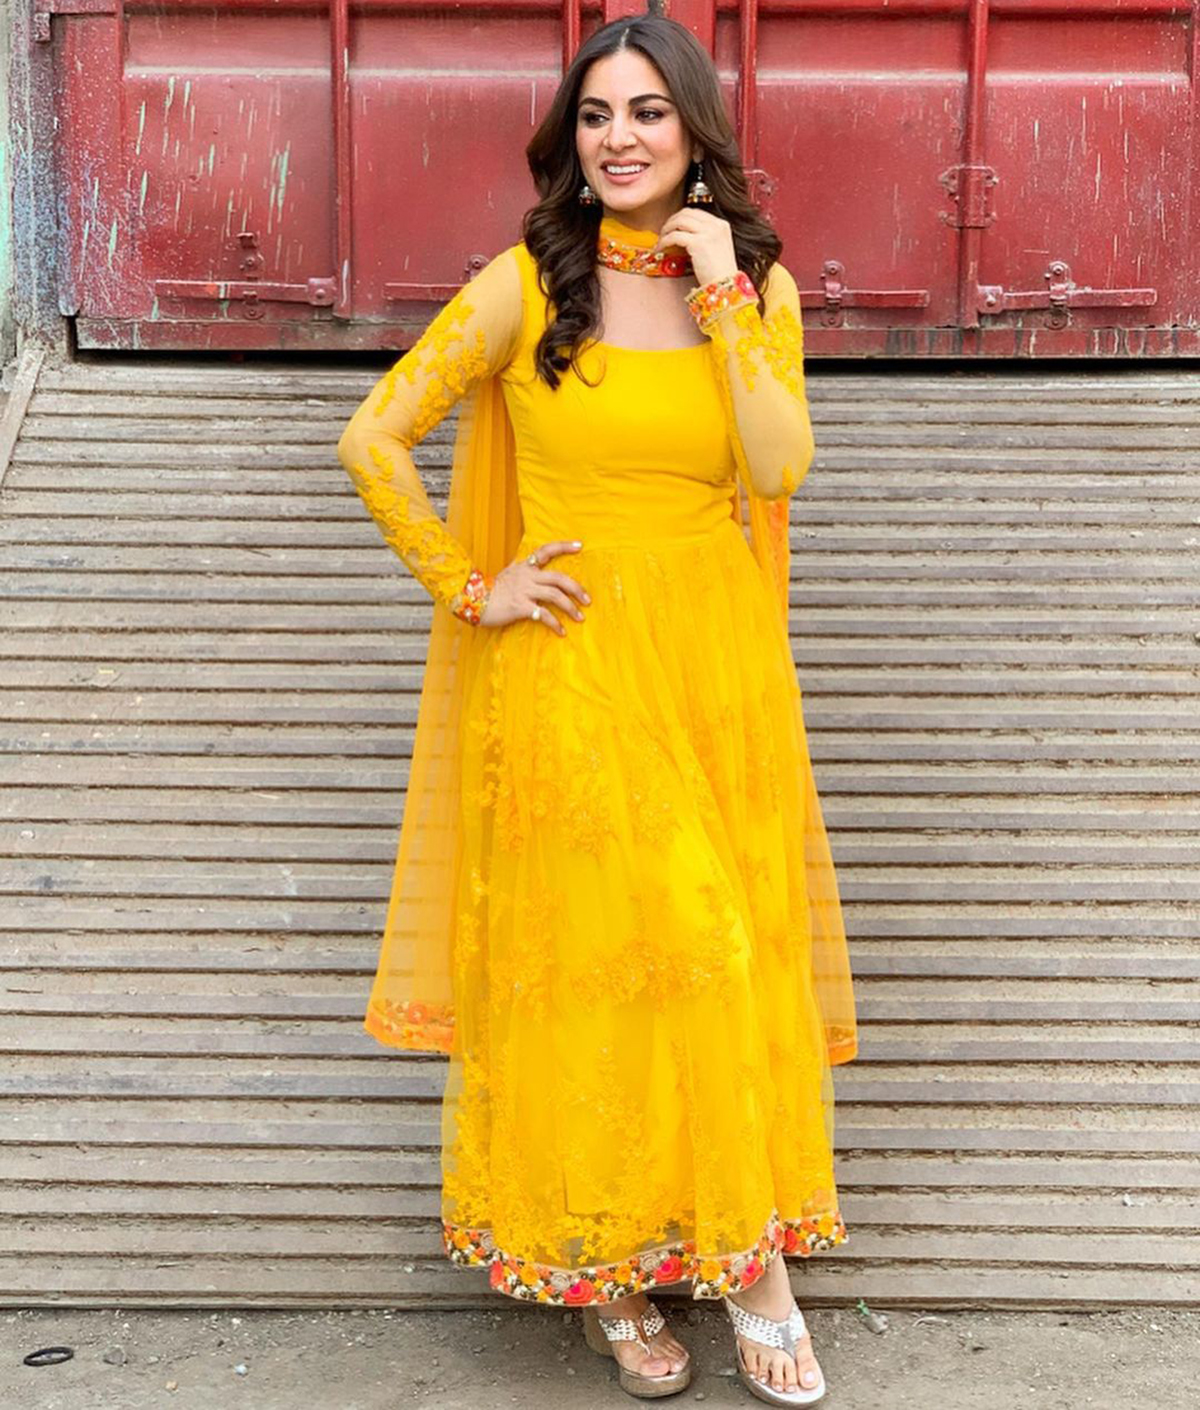 Basant Panchami 2021 Fashion: Wear Traditional Outfits in Yellow Colour ...